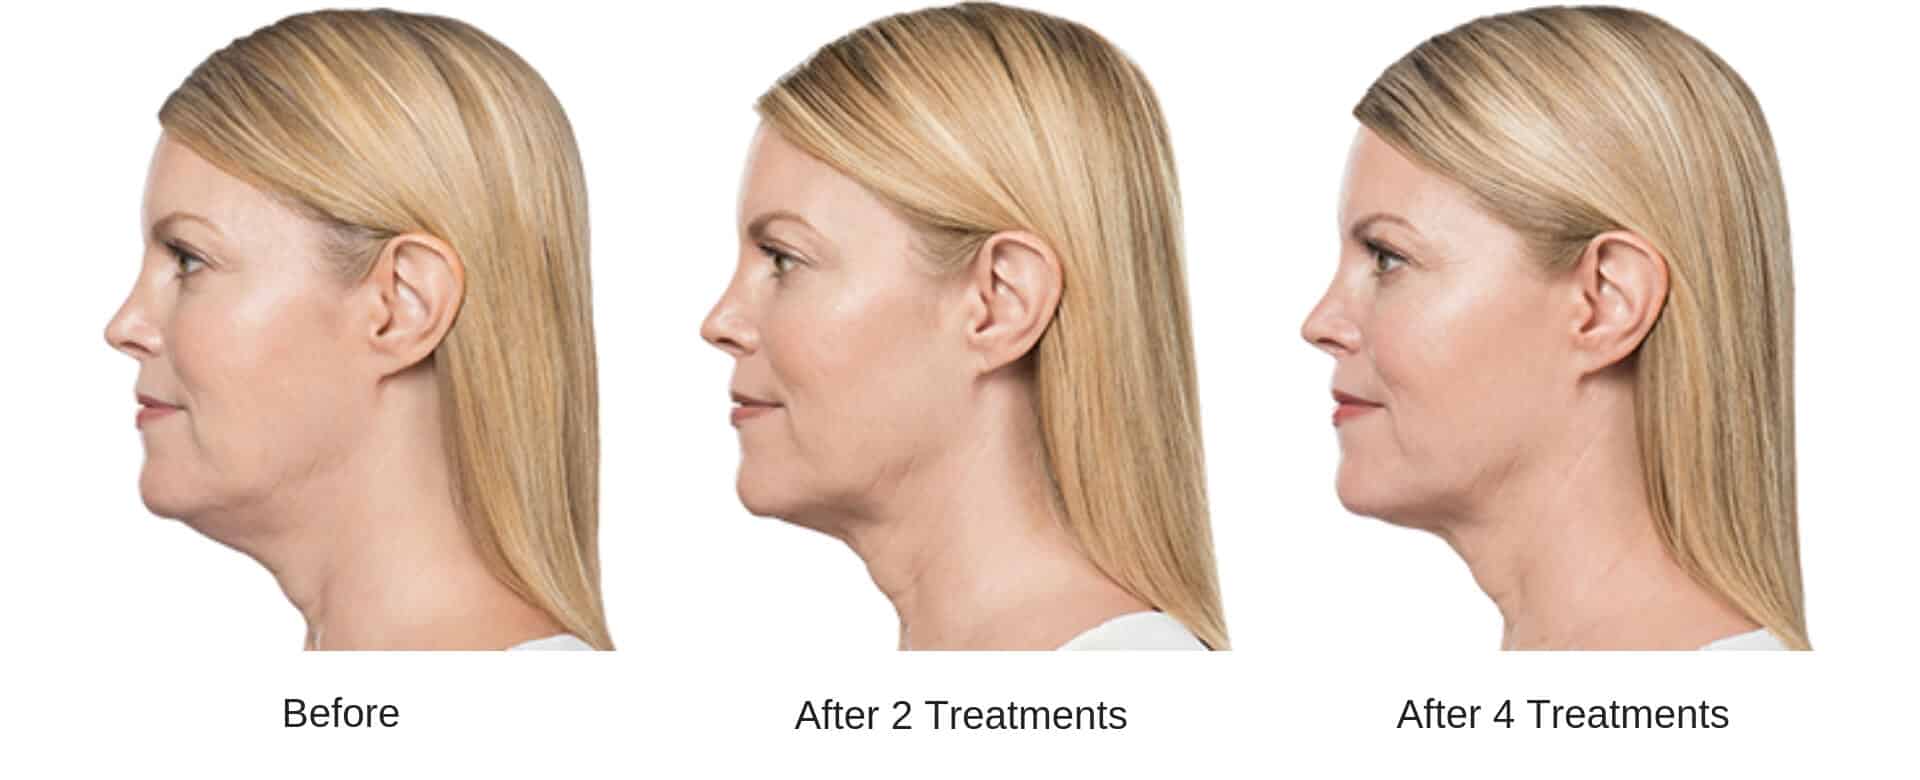 Woman's before and after kybella treatment results.